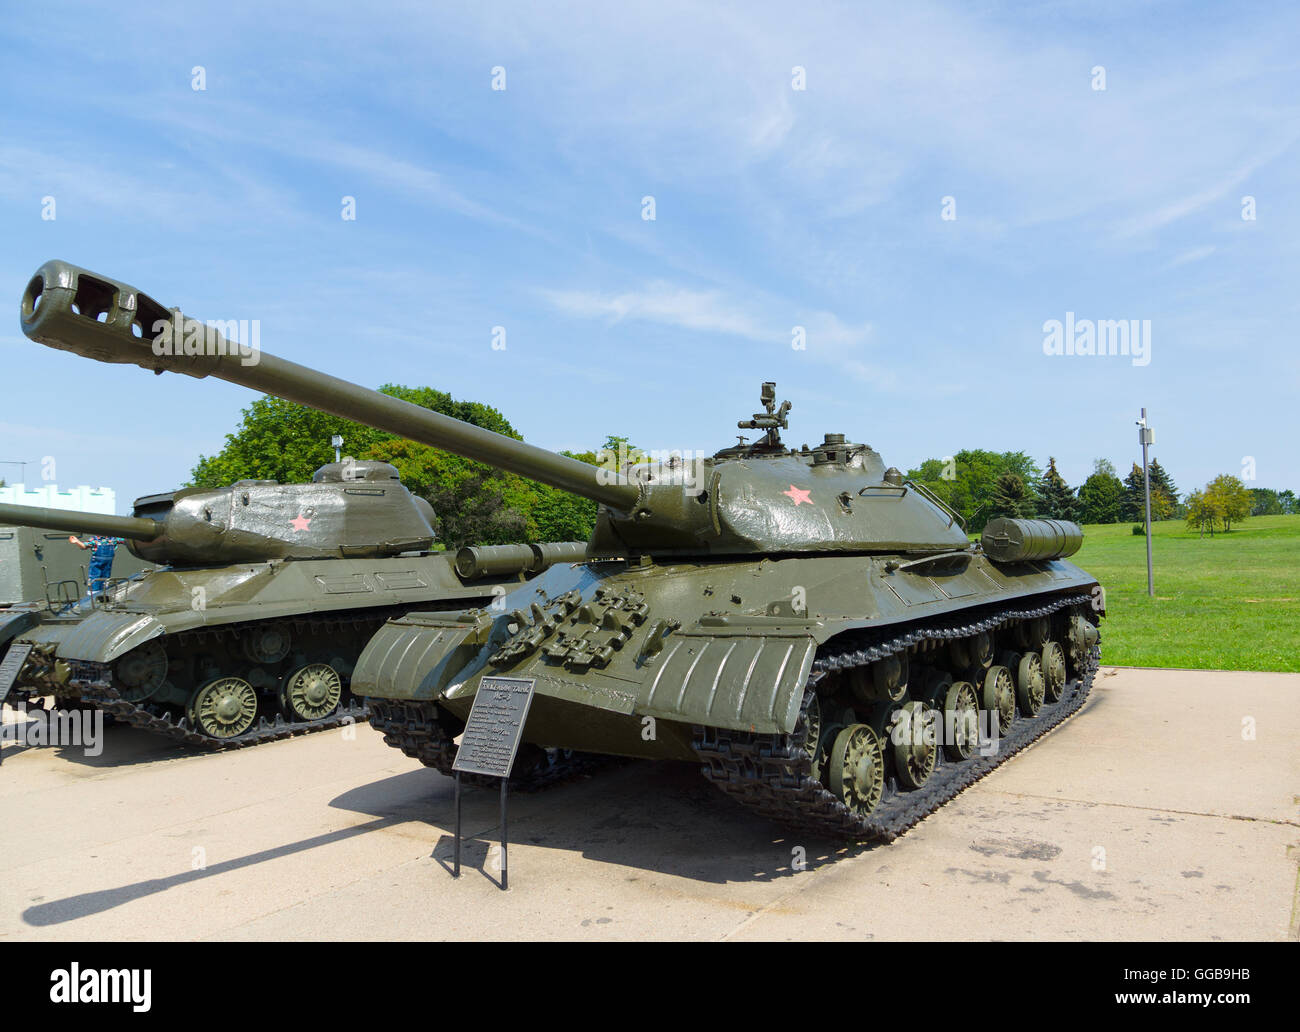 Minsk, Belarus - July 17, 2016: exhibition of military equipment since World War II near the memorial complex "Hill of Glory" in Stock Photo